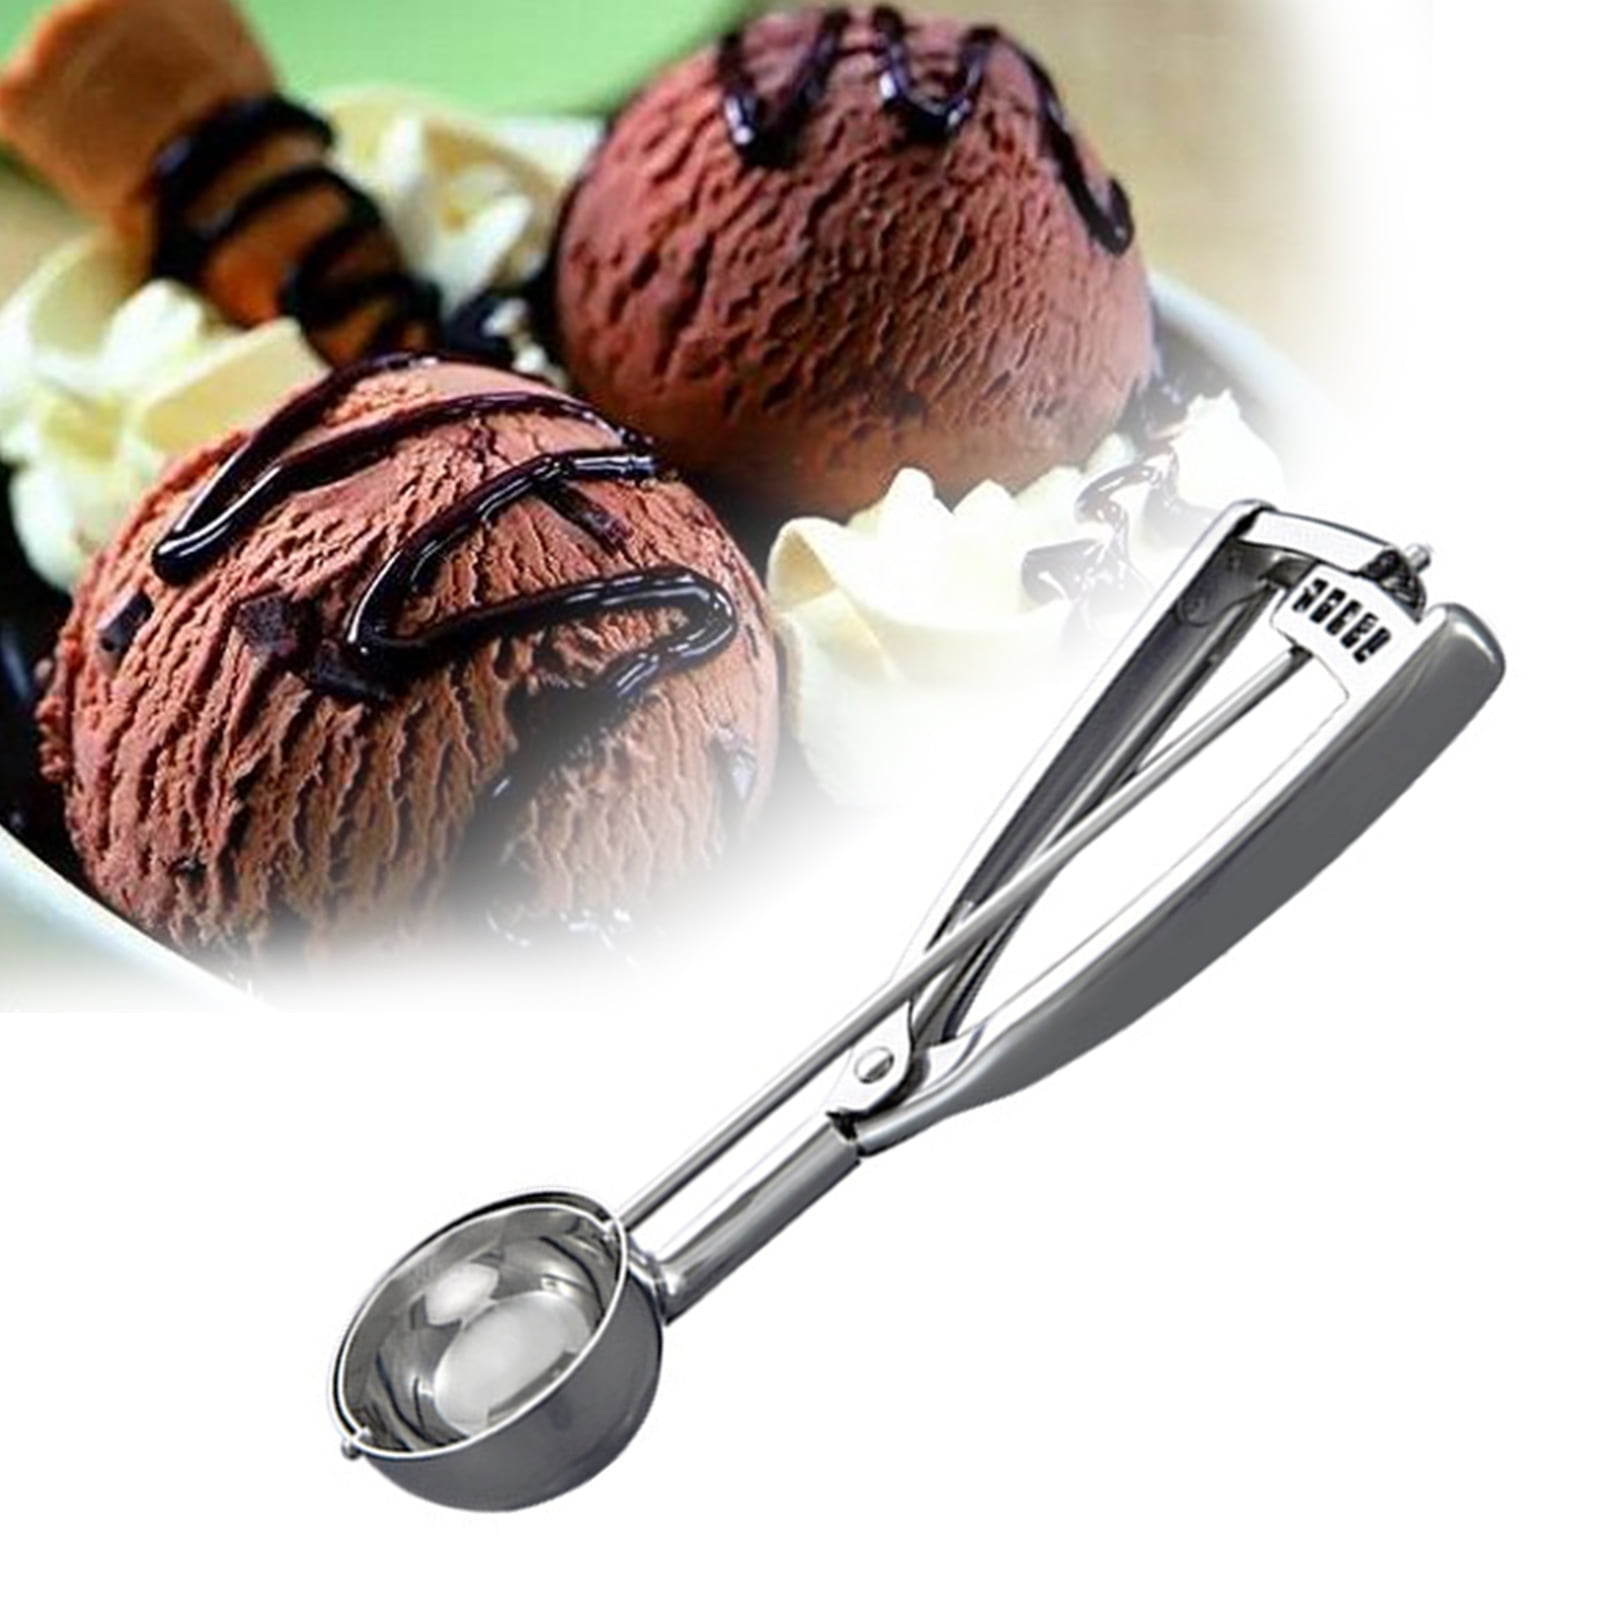 Cupcake Scoop,Scoop with Silicone Plunger Measures Equal Cupcakes or Muffins One-Touch Sliding Button Dispenses Batter。 1PC